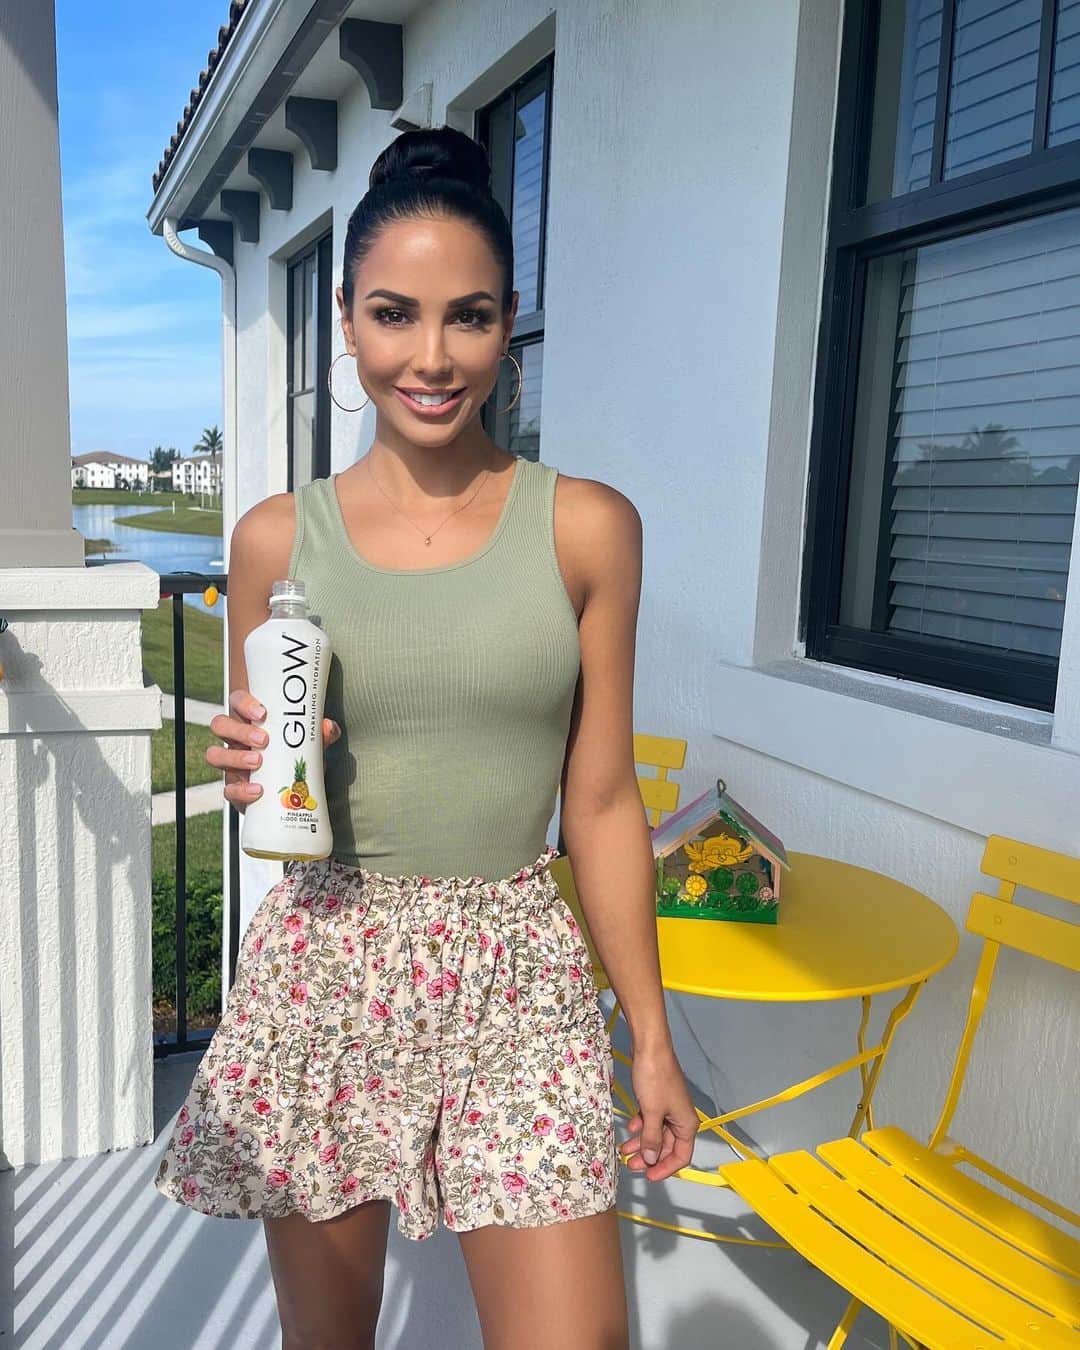 Melissa Risoのインスタグラム：「What a beautiful day in Miami. I’m enjoying the outdoors while drinking my delicious @drinkglow   #glowpartner #glowhydration #drinkglow #glowwithit」